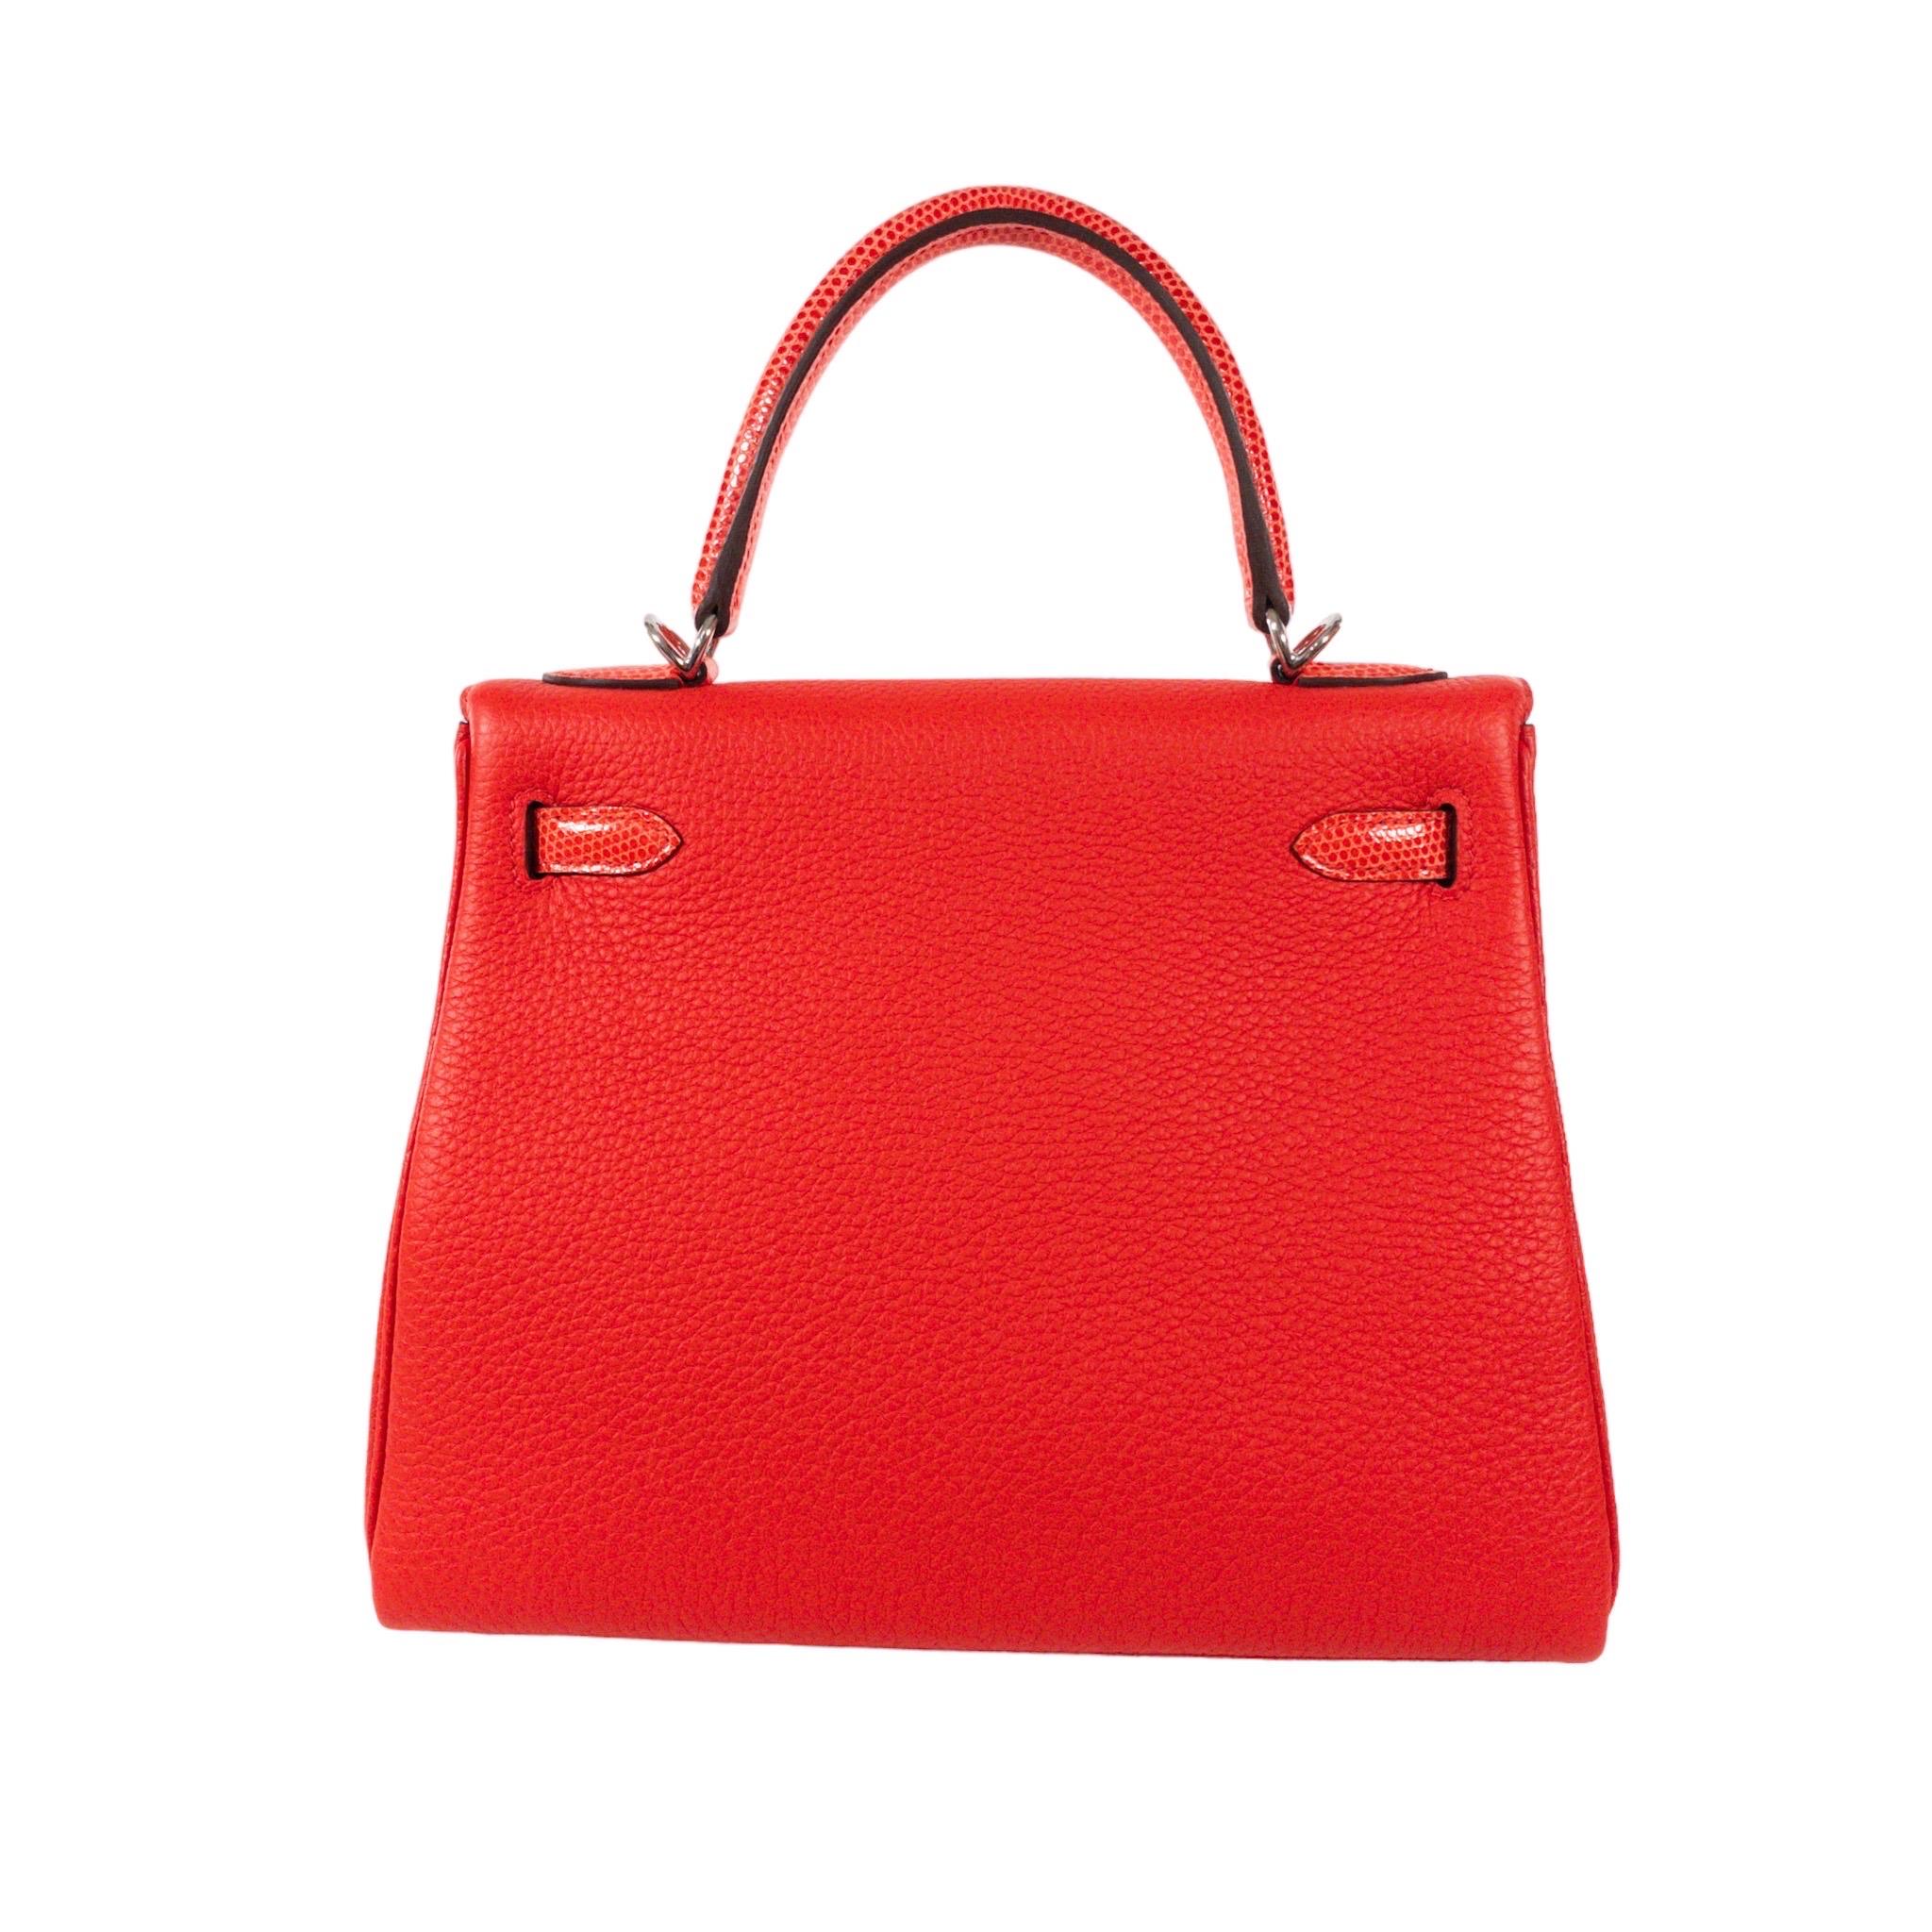 Consign of the Times presents this Limited Edition Hermes Kelly 25cm Retourne Orange Poppy and Capucine Lizard Touch. Palladium hardware with detachable shoulder strap. Flap closure and opens with turn lock straps. Lizard trim on straps, handle,